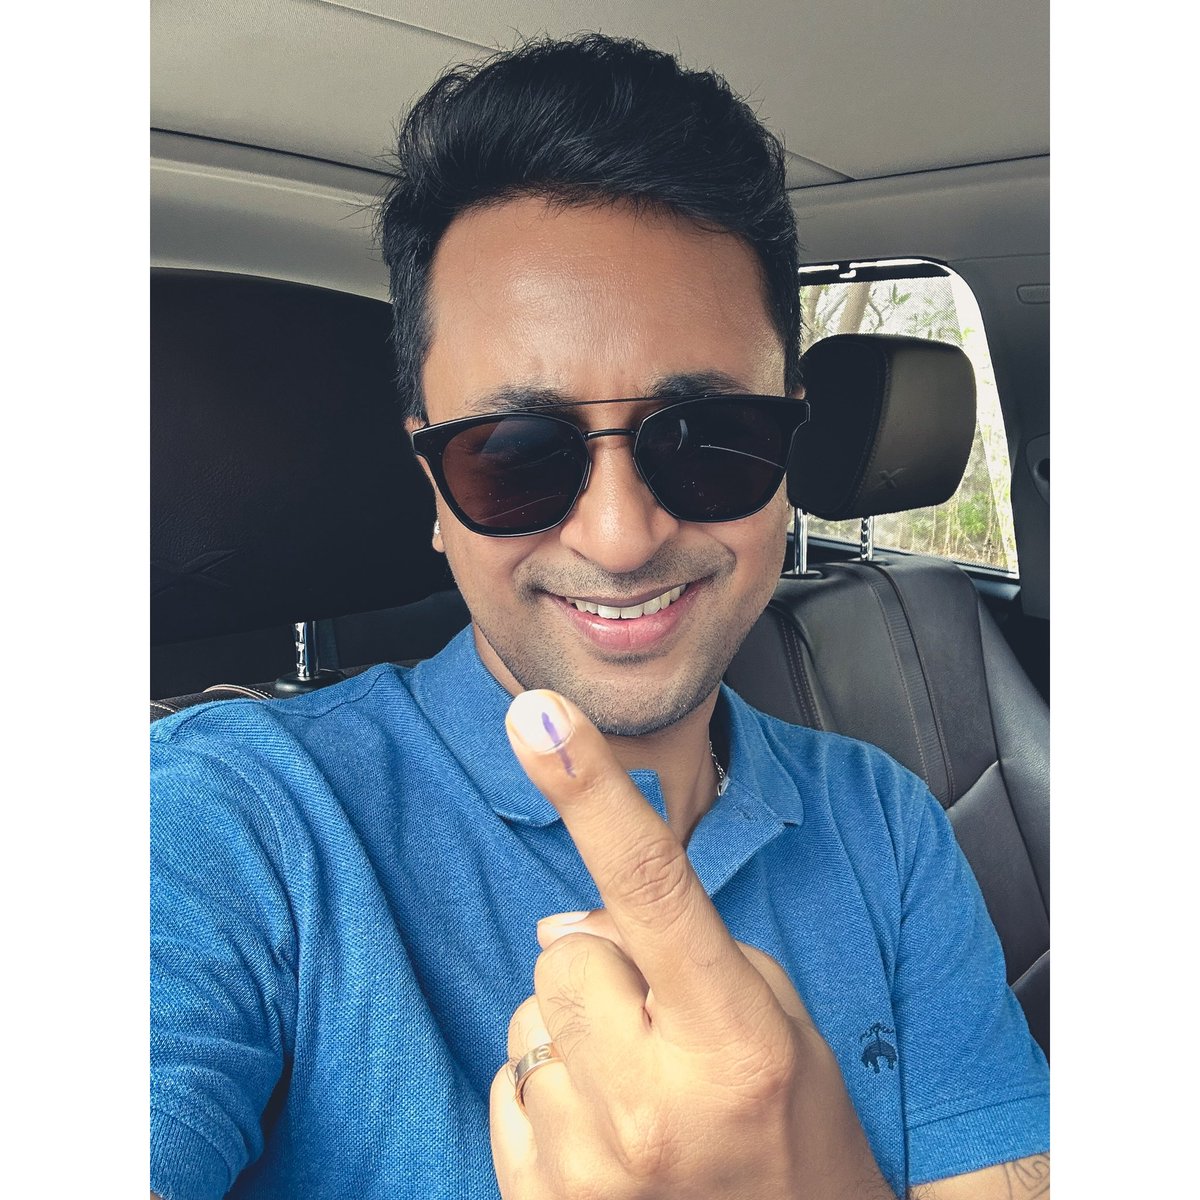 Participated in the biggest celebration of democracy and exercised the right to vote. #Vote #duty #nationfirst